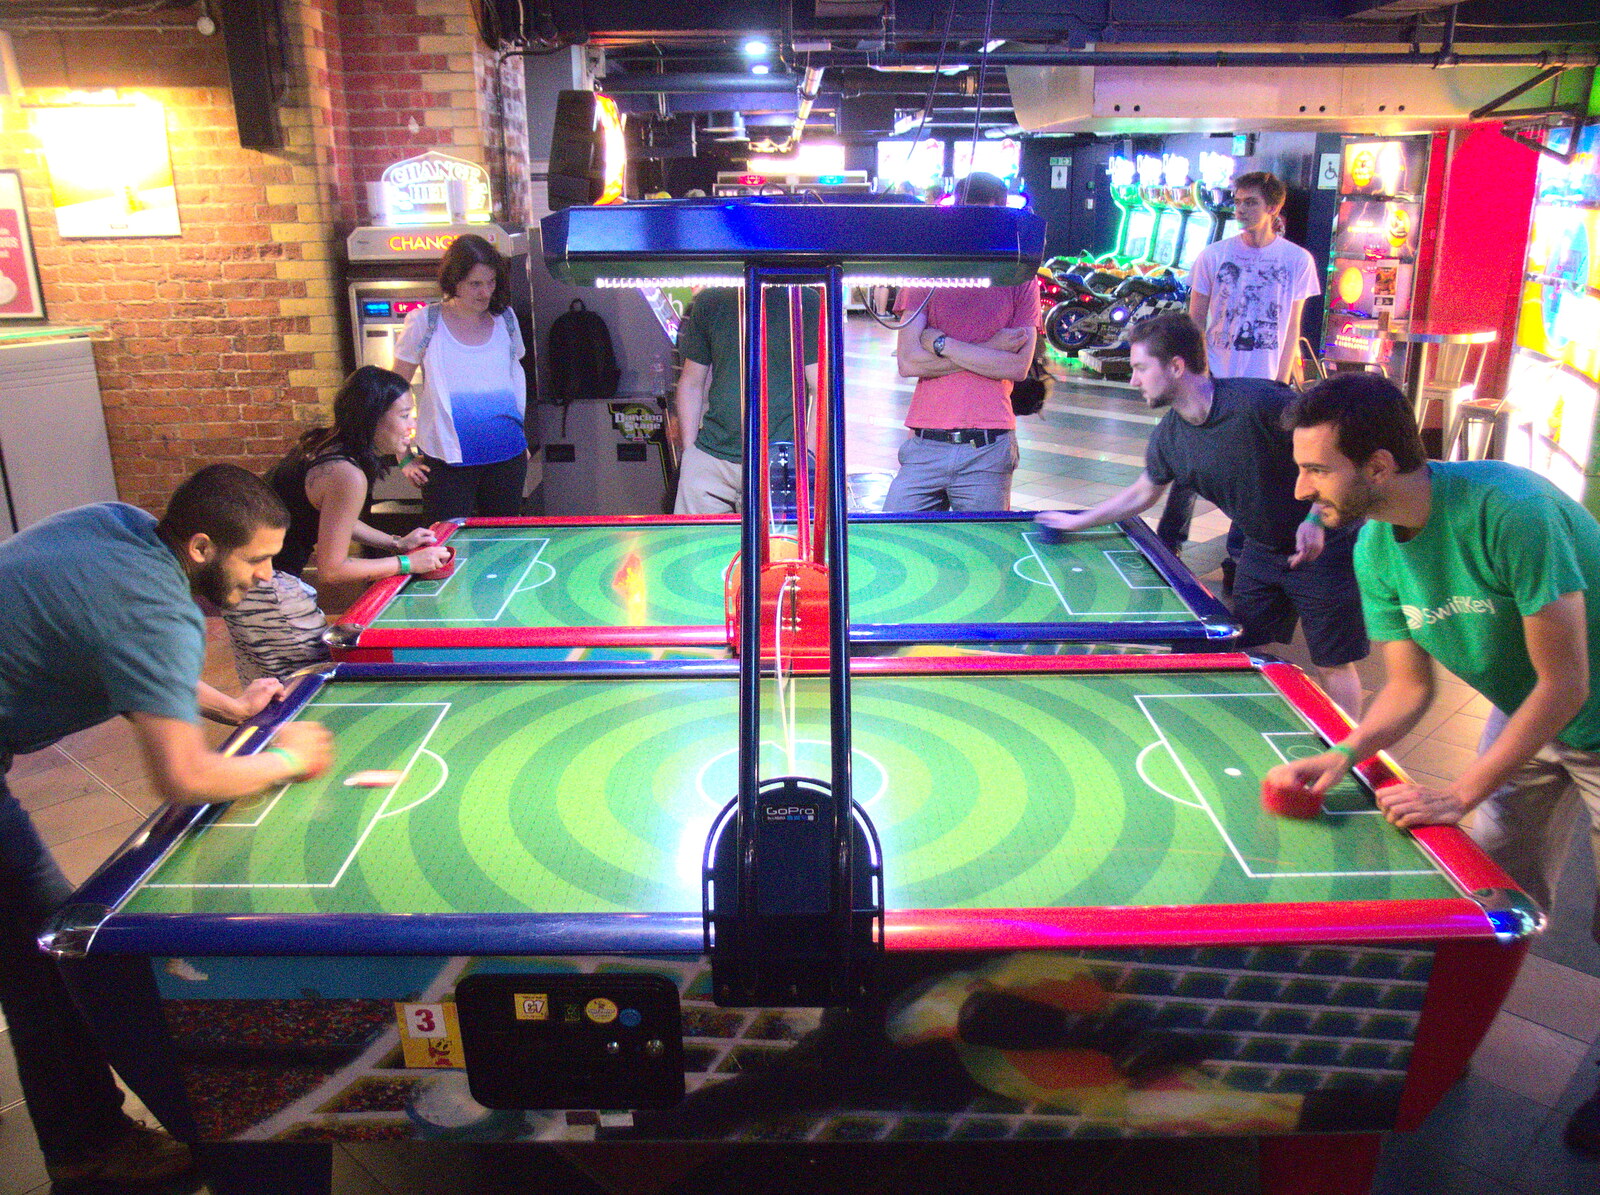 Games of air hockey break out from SwiftKey does Namco Funscape, Westminster, London - 20th June 2017